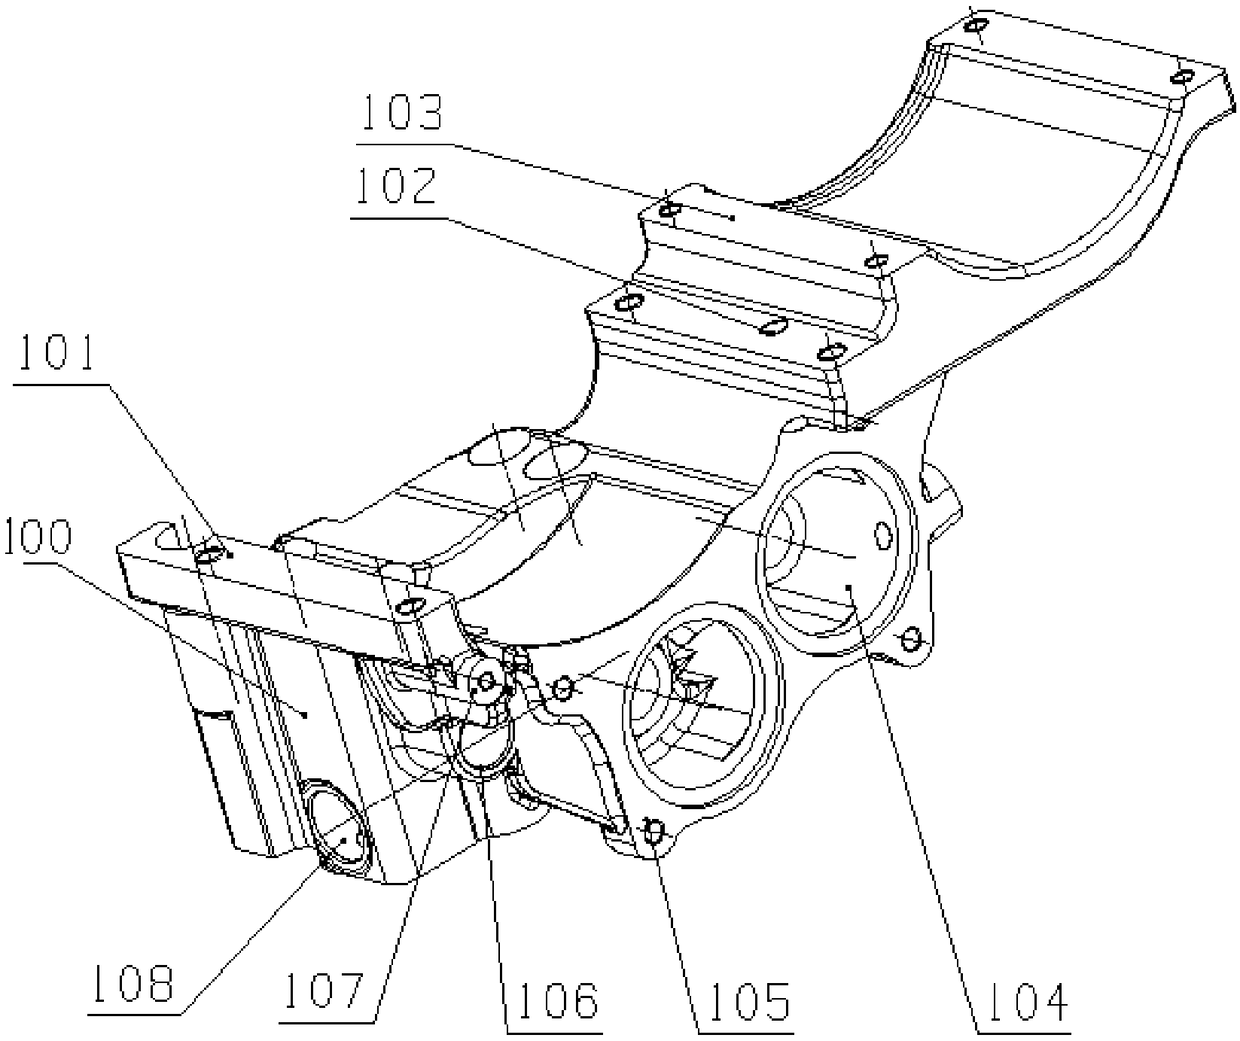 V-shaped engine integrated support structure